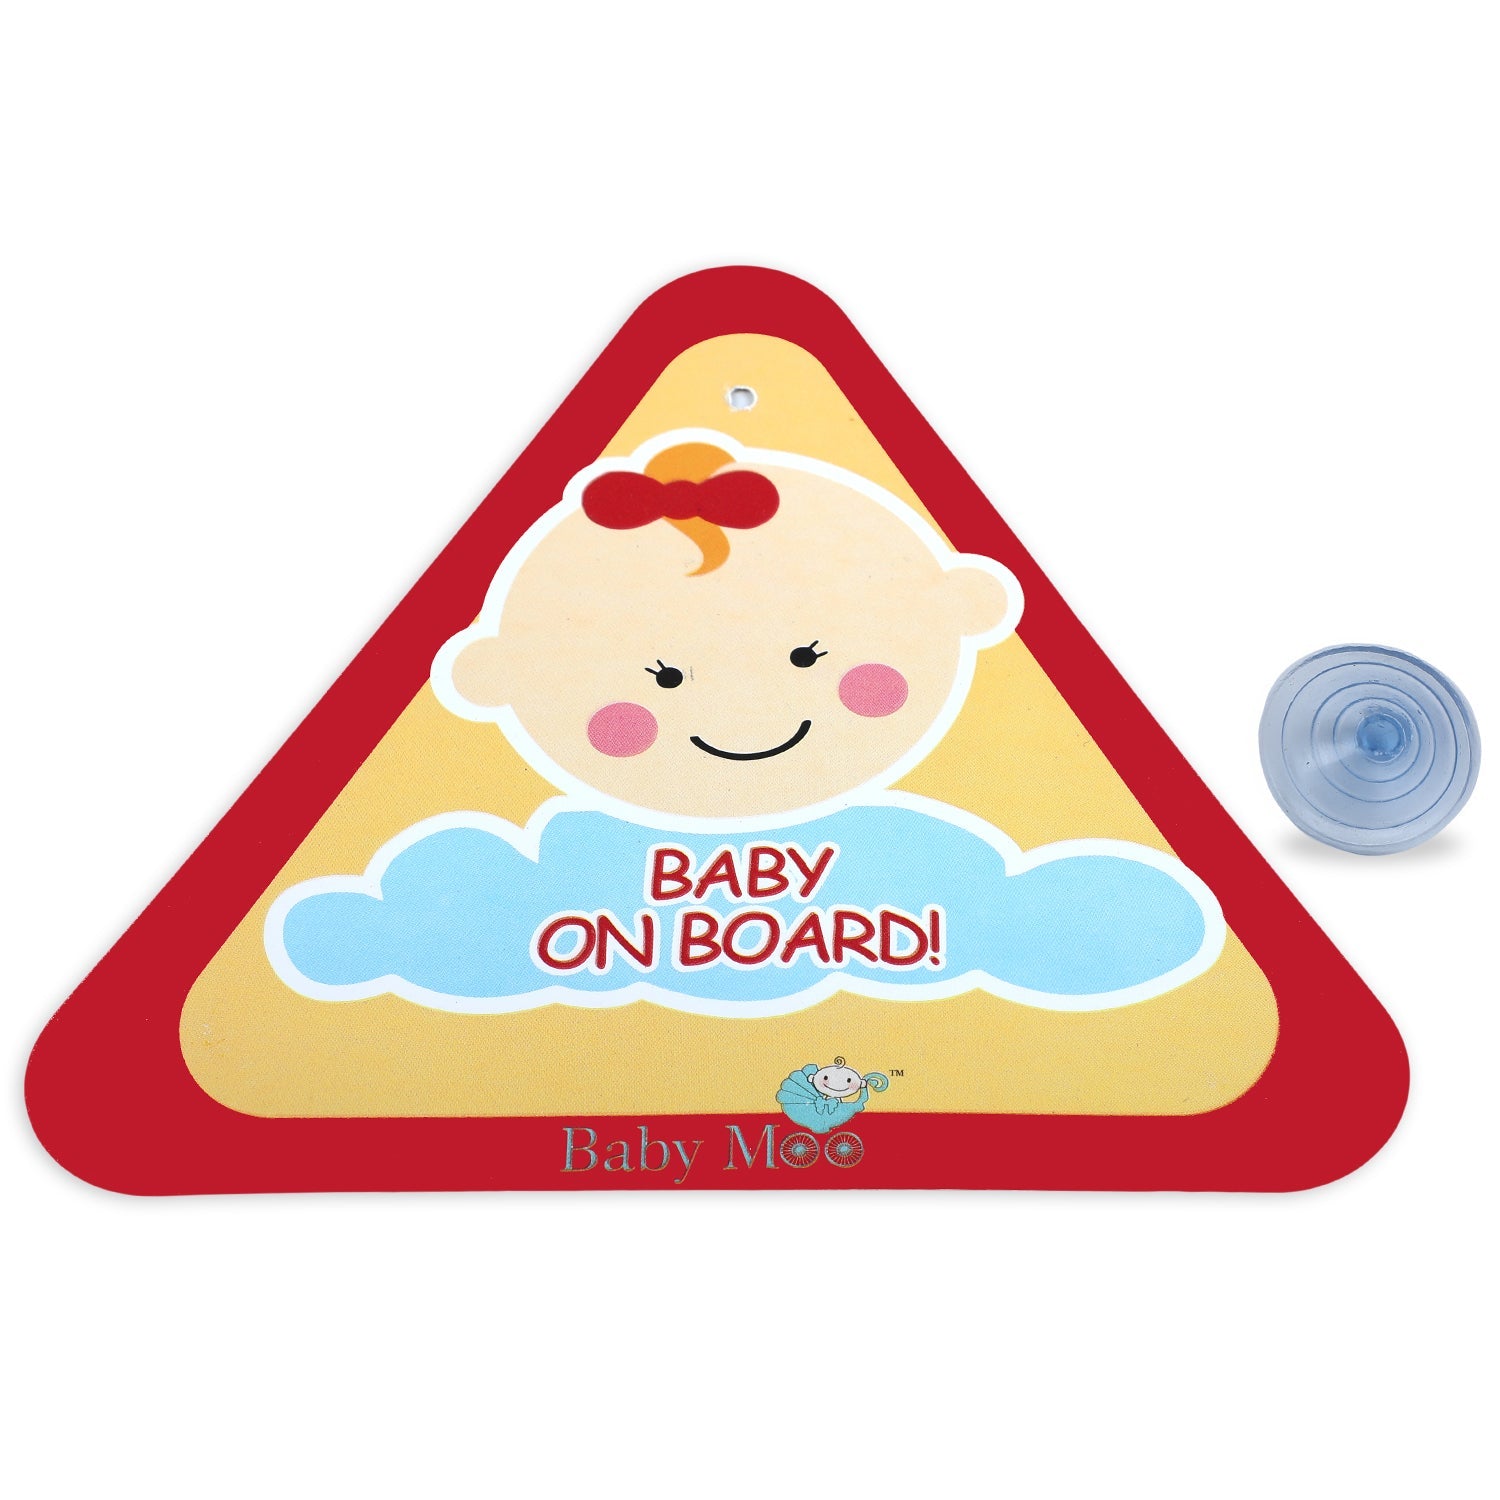 Baby Moo Triangular Baby On Board With Vacuum Suction Cup Clip - Red